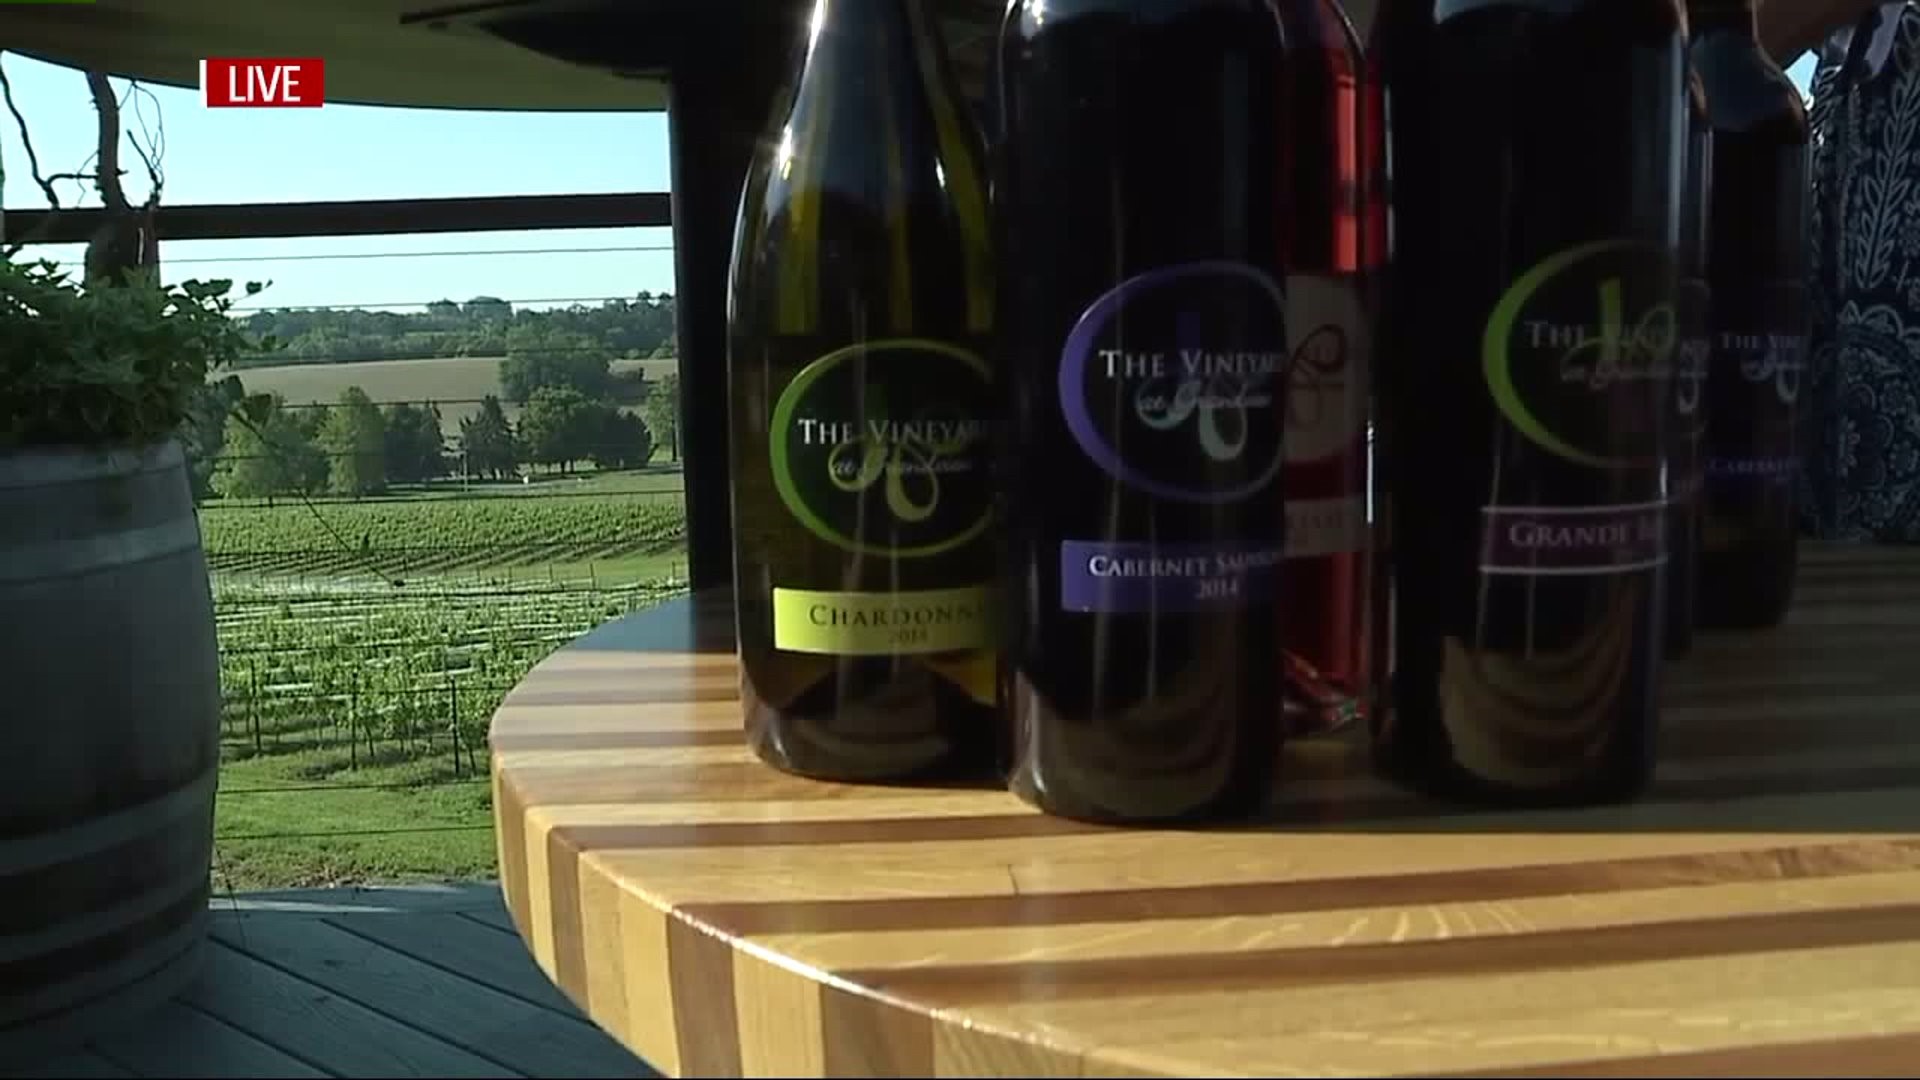 Wine tasting, music, food, and more at Wine By The Vine at the Vineyard at Grandview